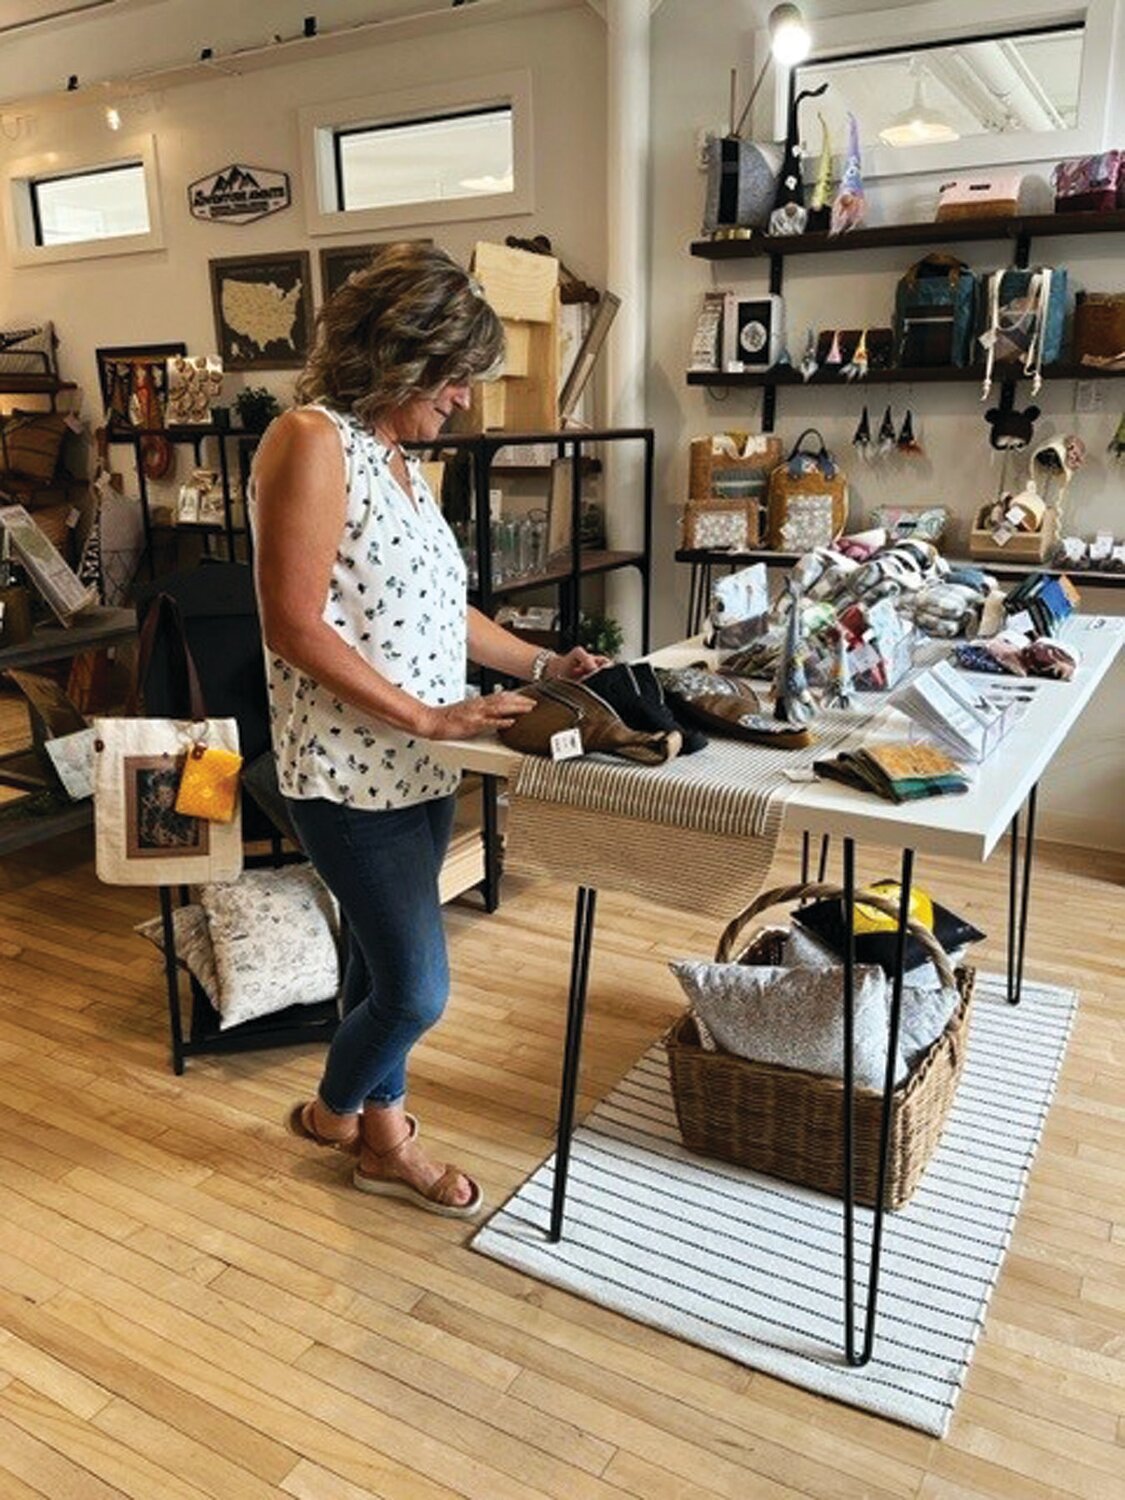 Corinna Garis, marketing director for Dublin Town Center, looks over some handmade items at Makers, a craft boutique at The Square.